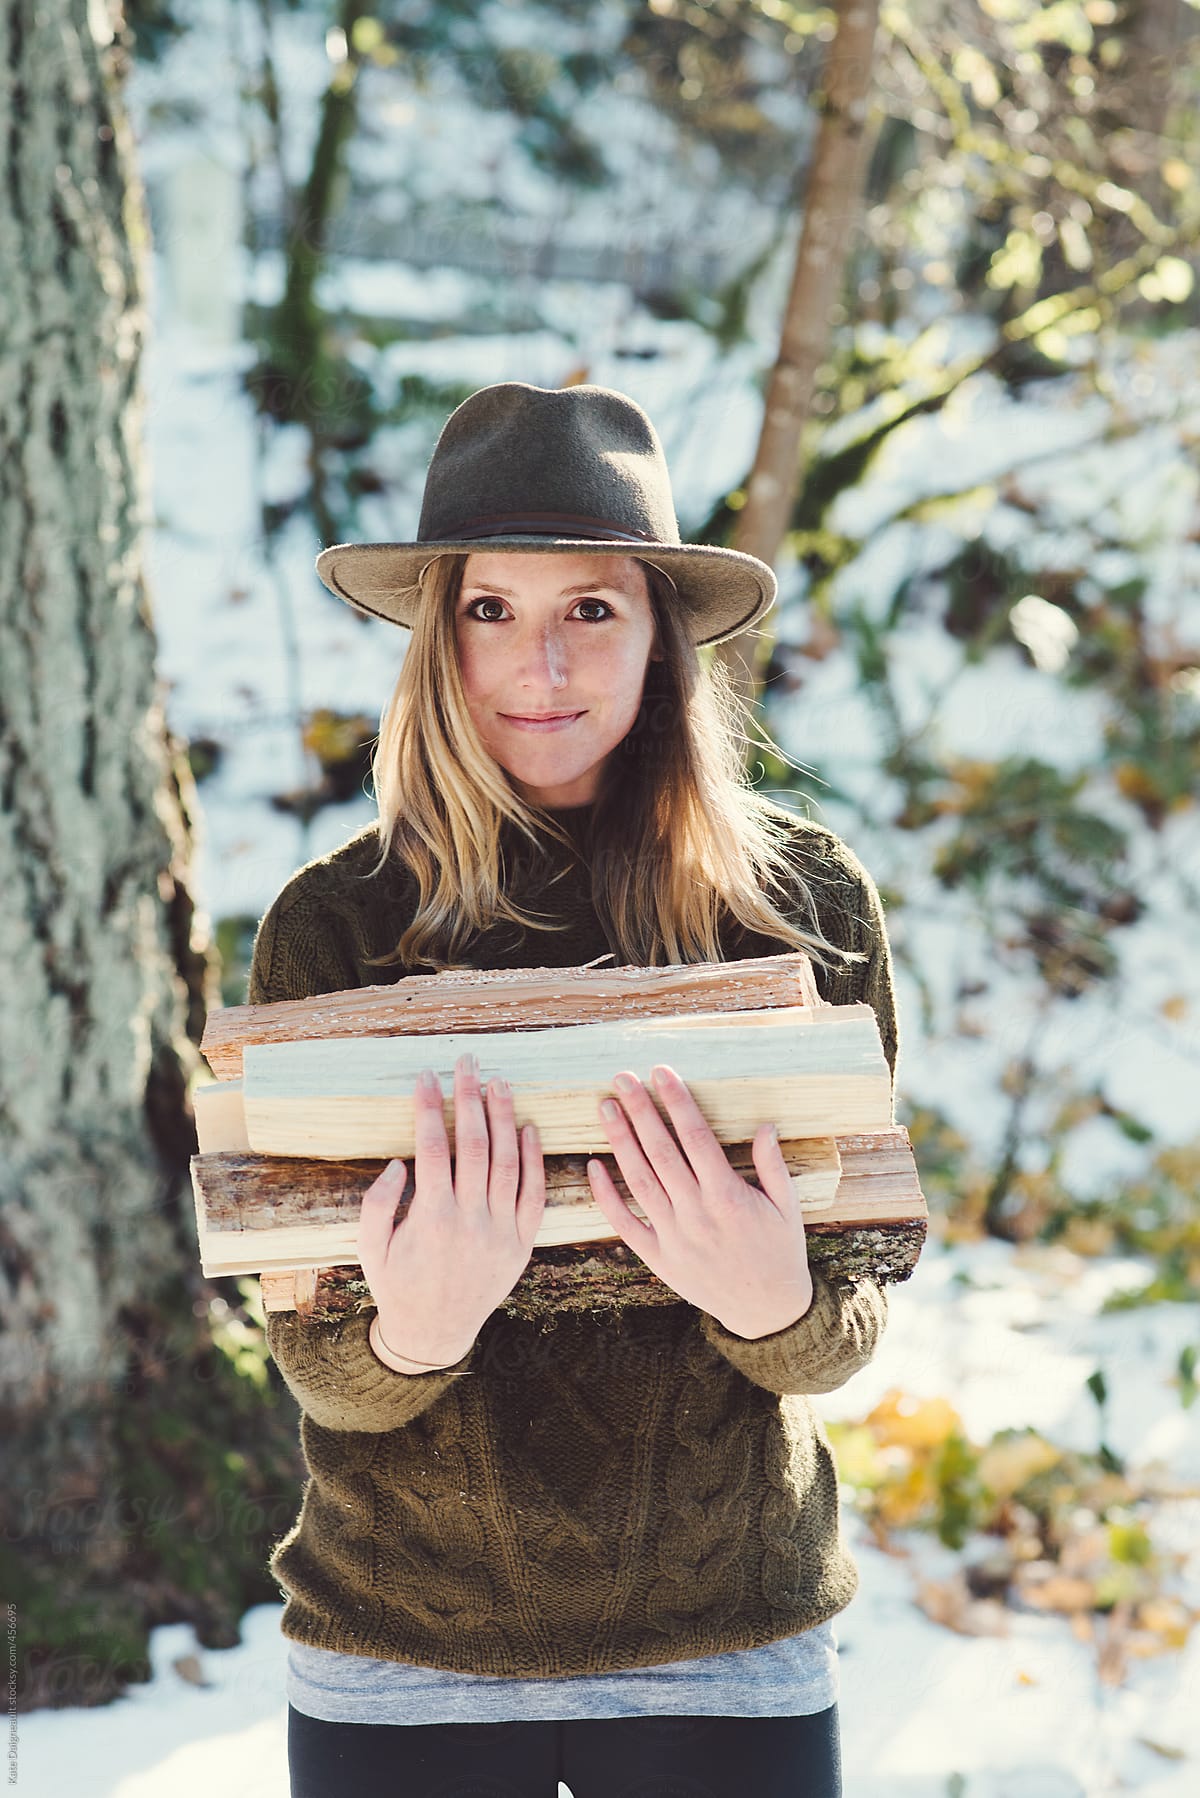 Portrait of a beautiful young woman holding a small pile of firewood